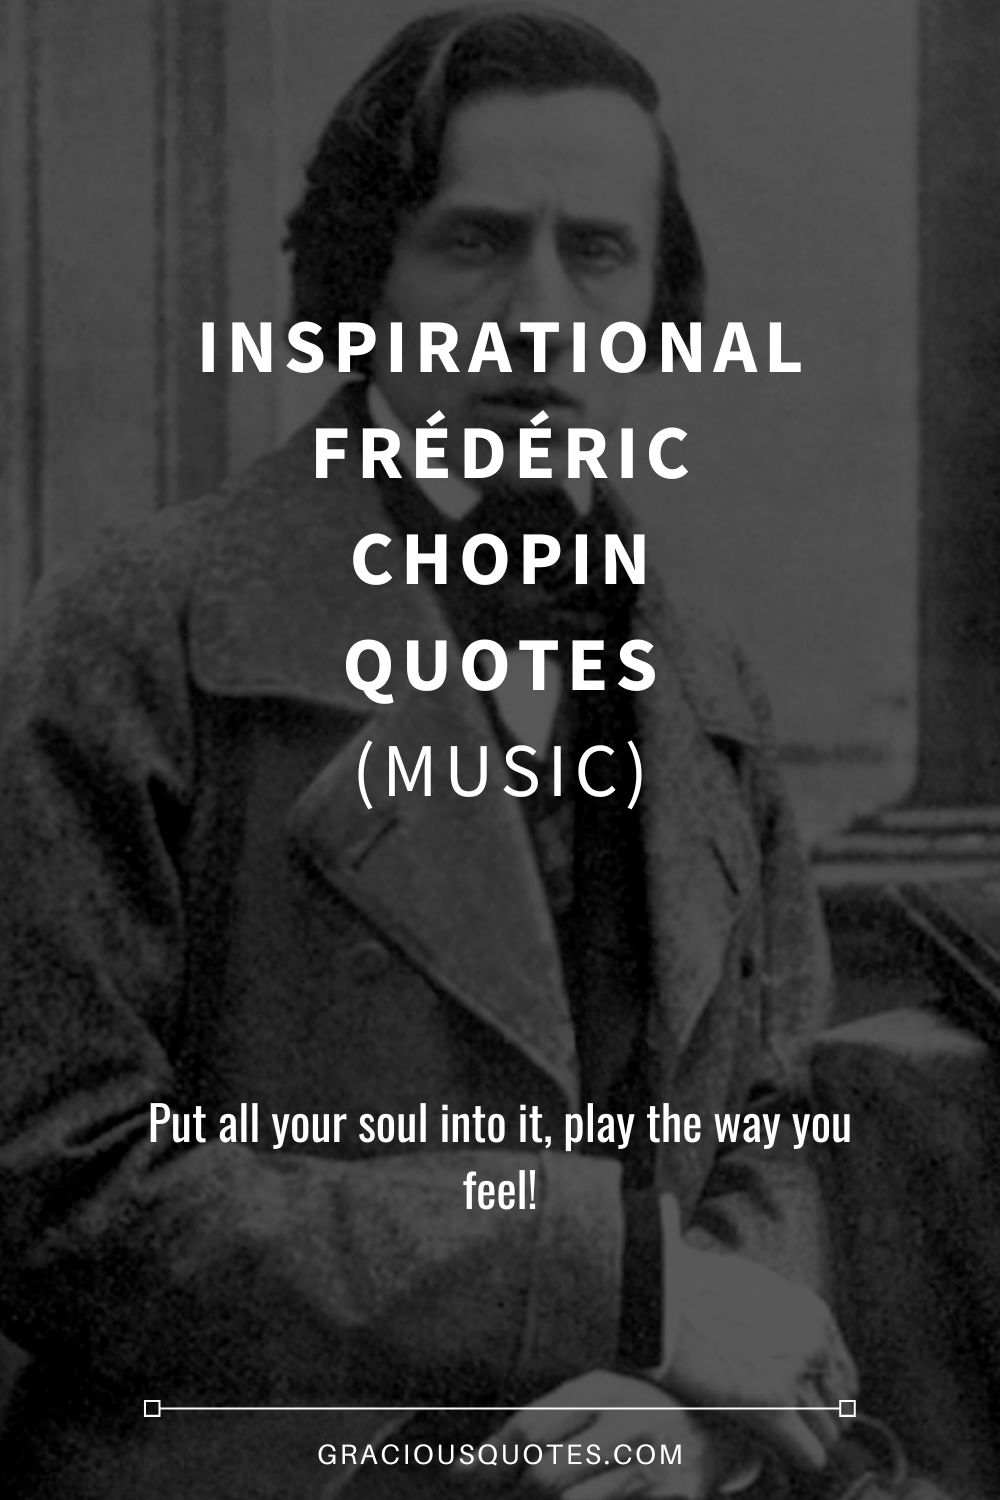 Inspirational Frédéric Chopin Quotes (MUSIC) - Gracious Quotes